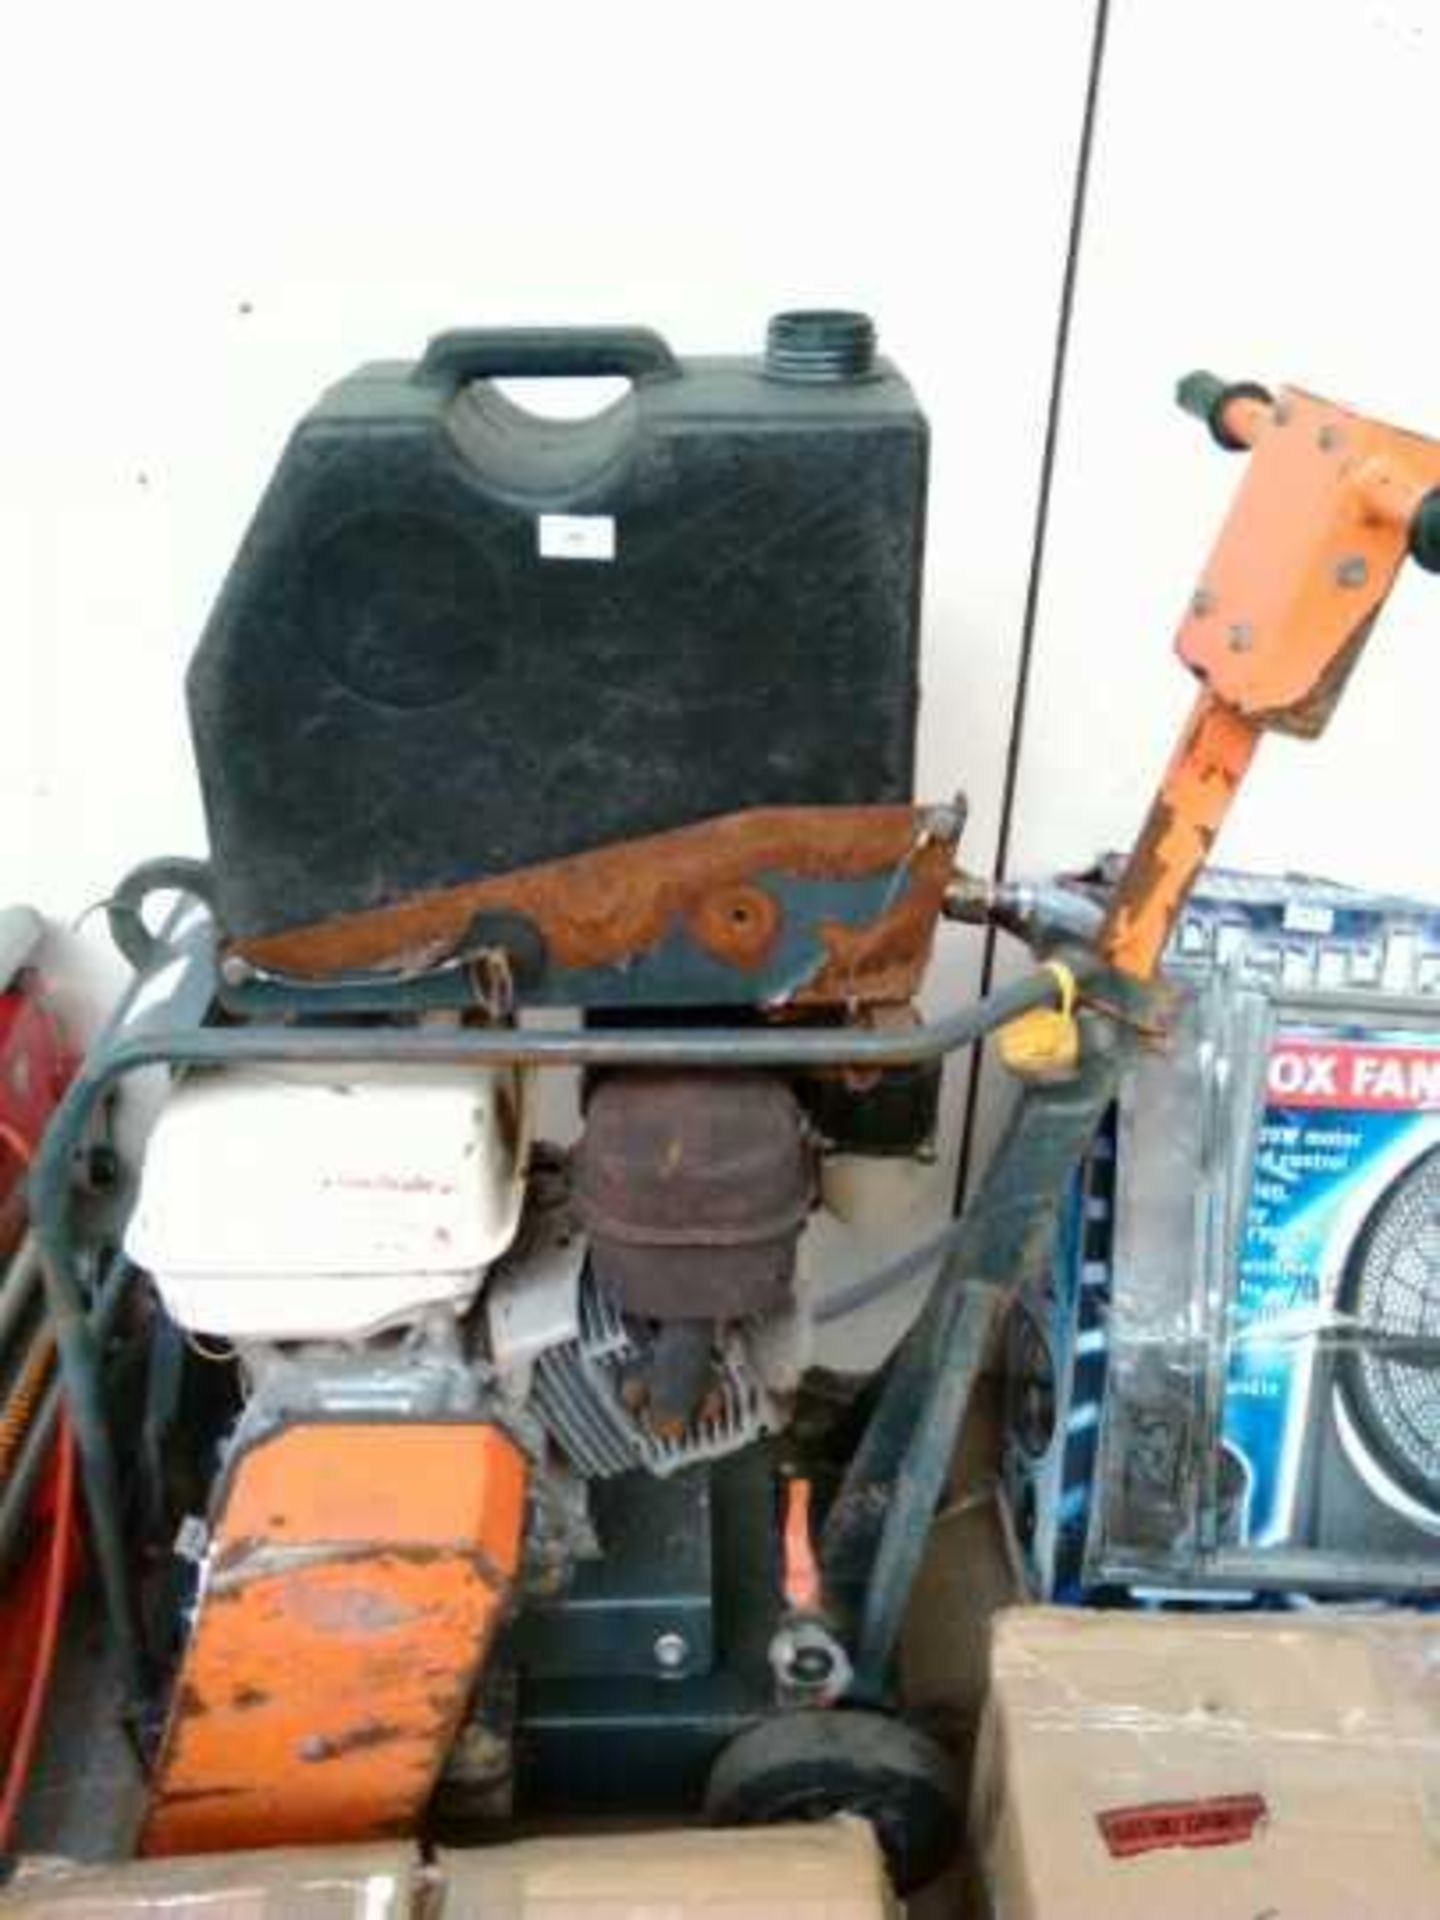 Belle C271 2011 floor saw, with Honda GX 390 engine, starts and runs.